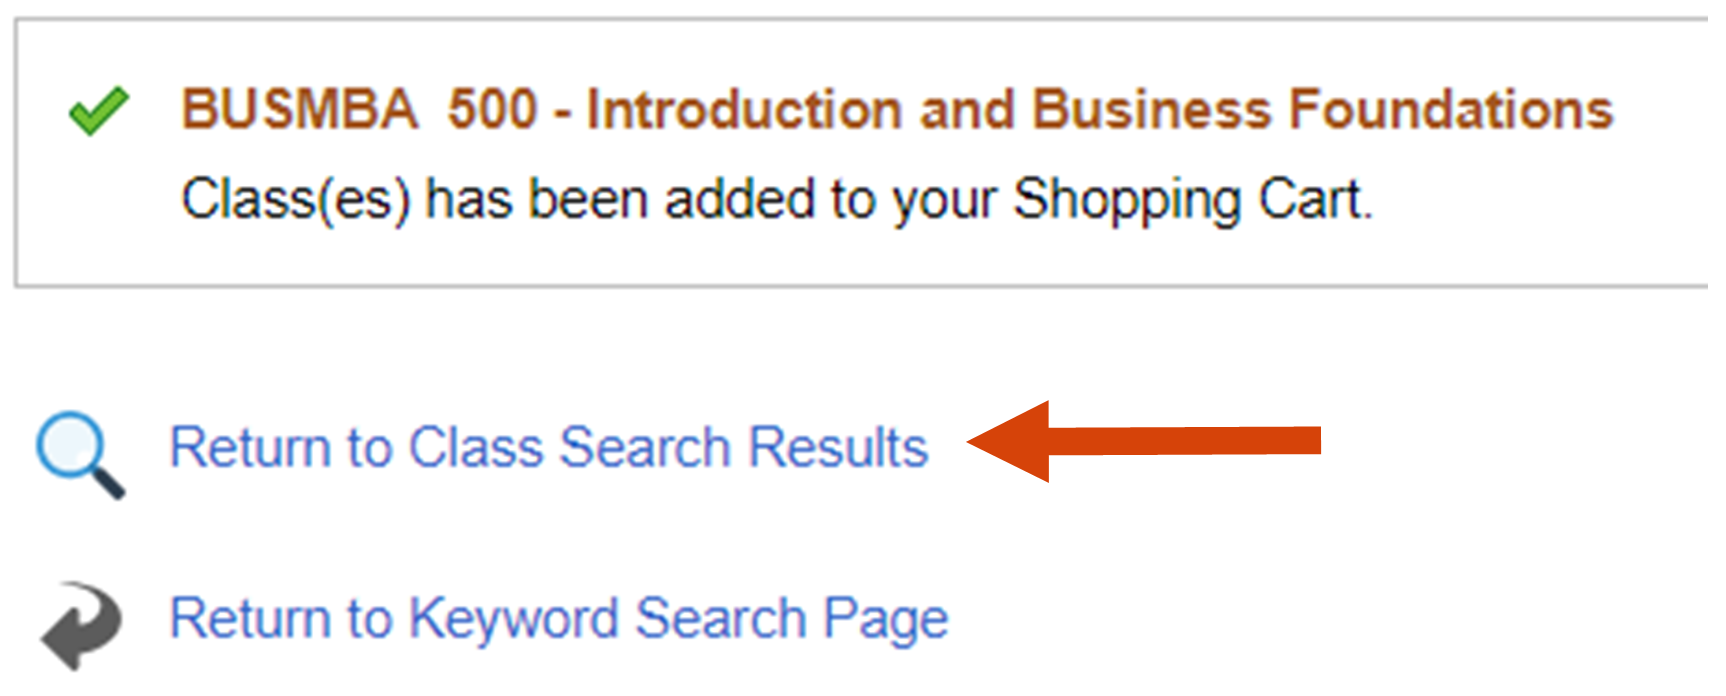 Arrow pointing to "Return to Class Search Results"